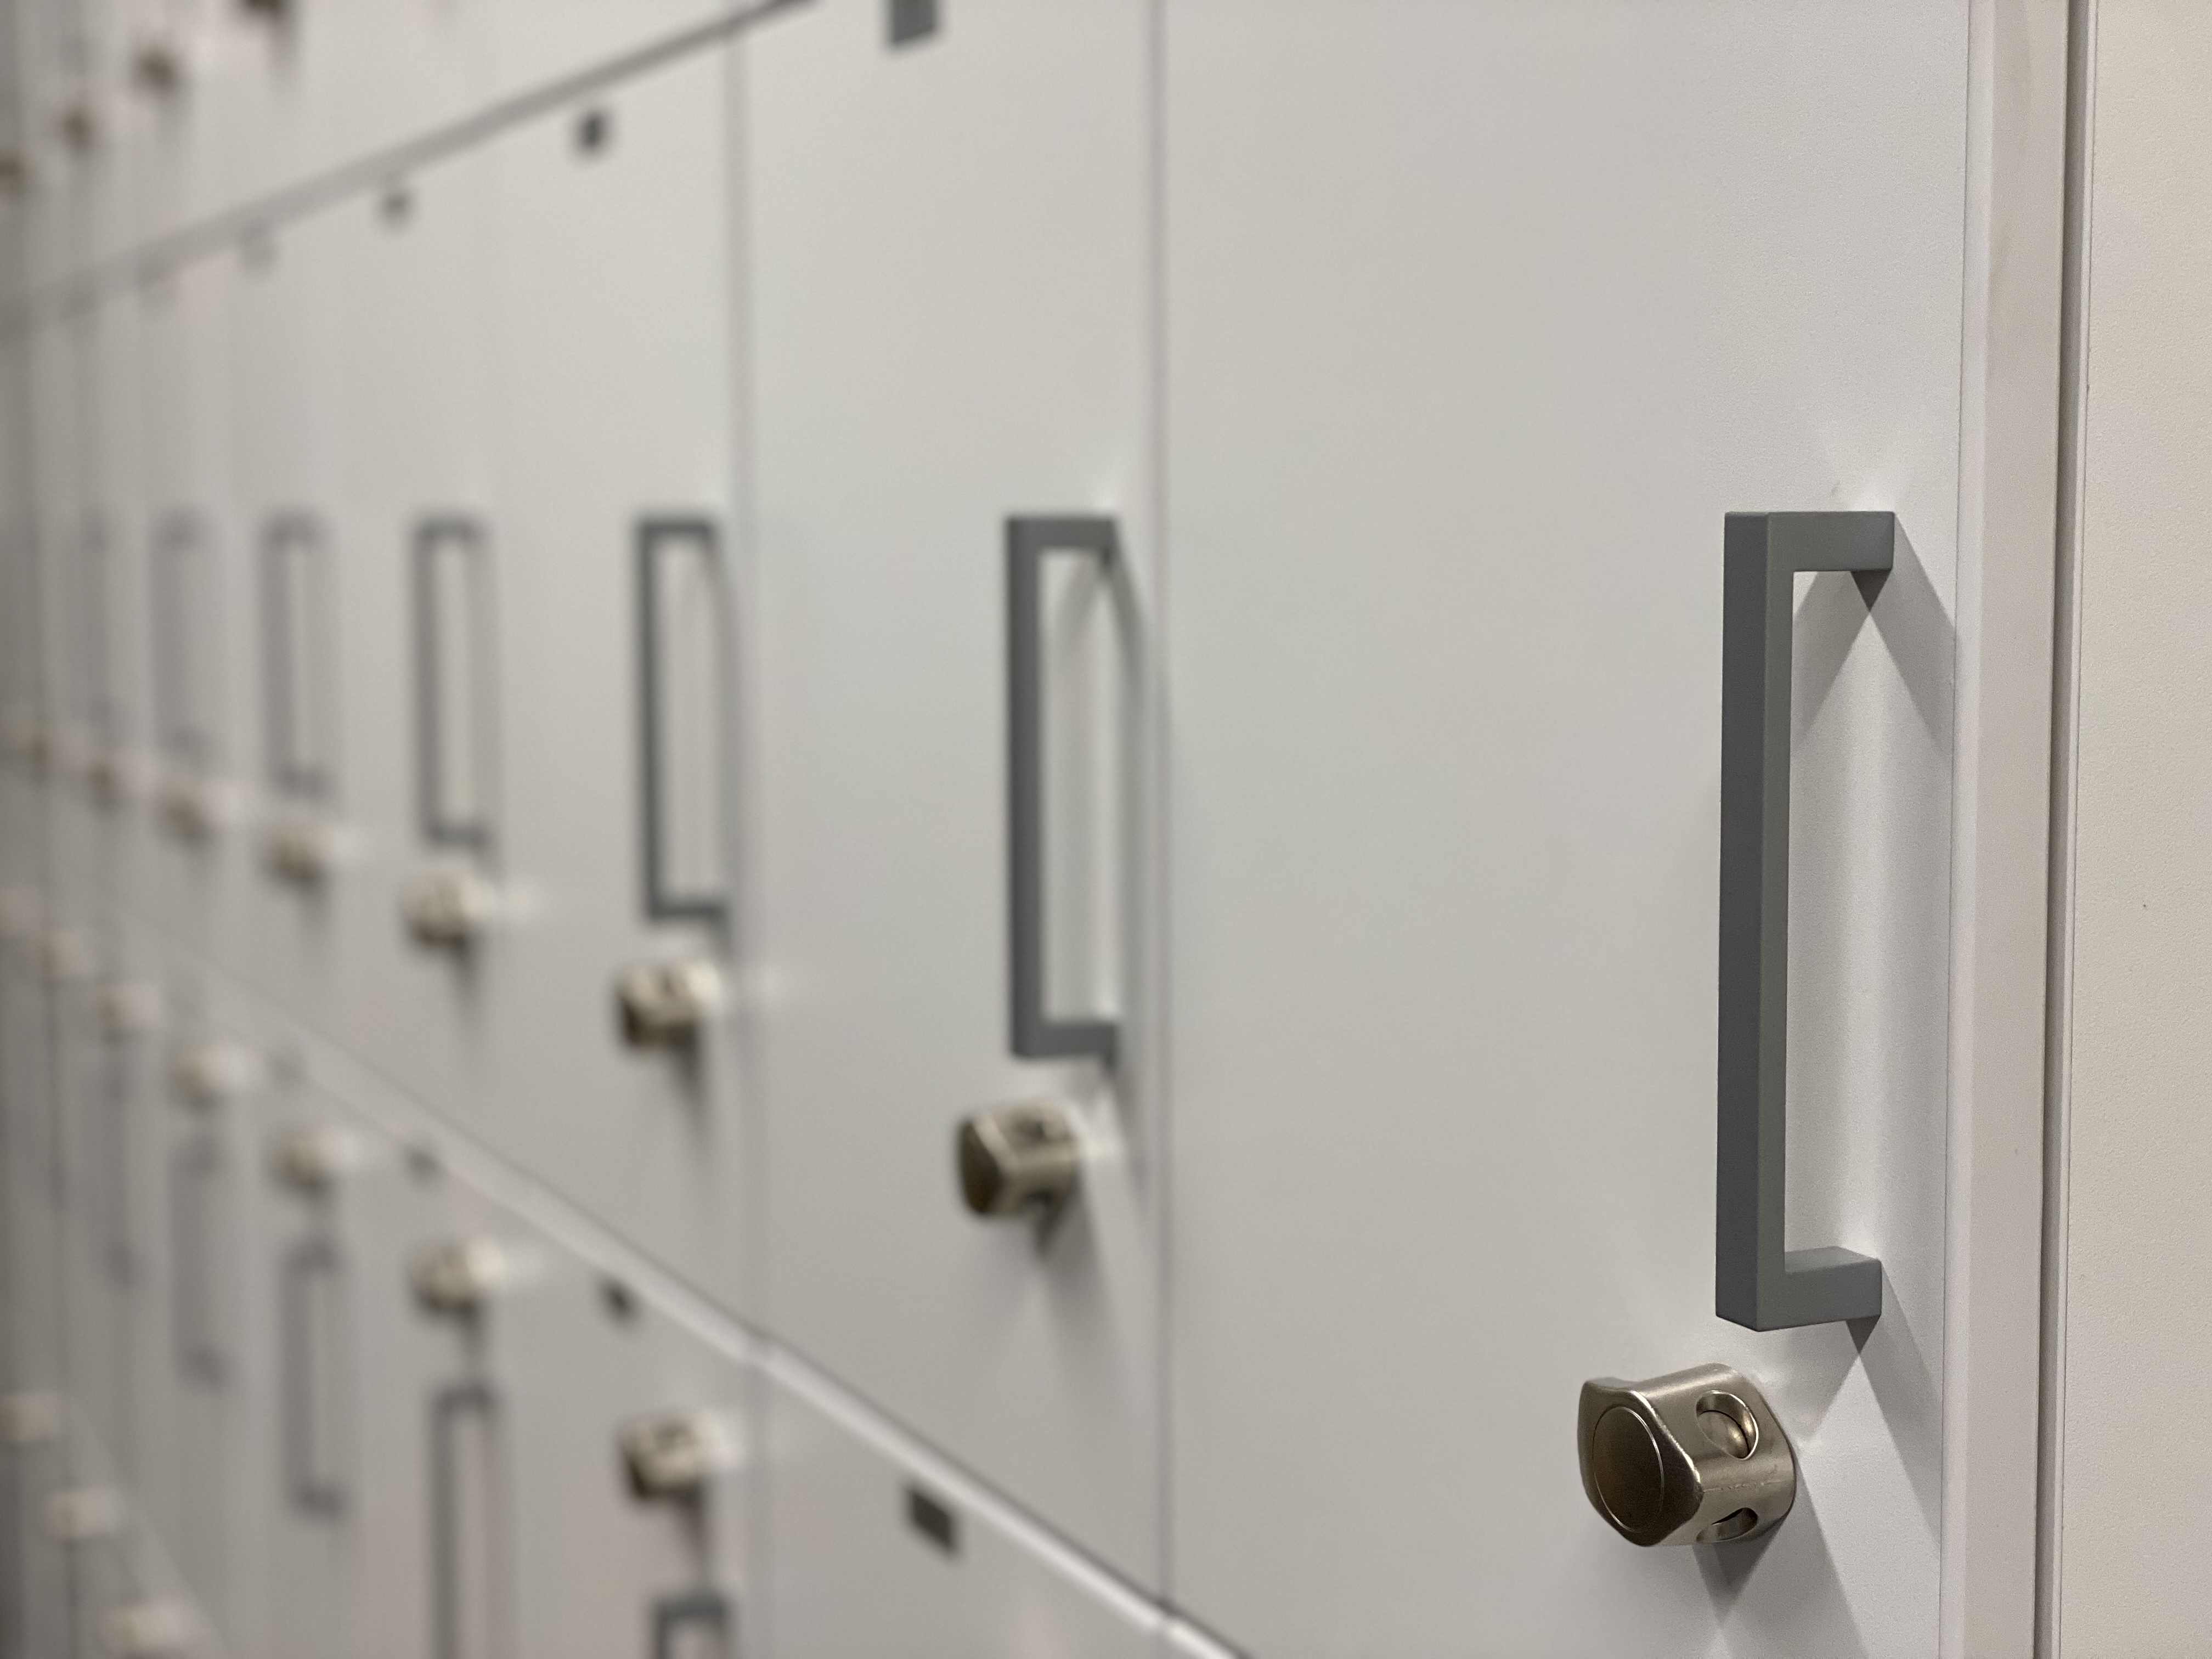 Health Sciences Library lockers are located on the 3rd floor.